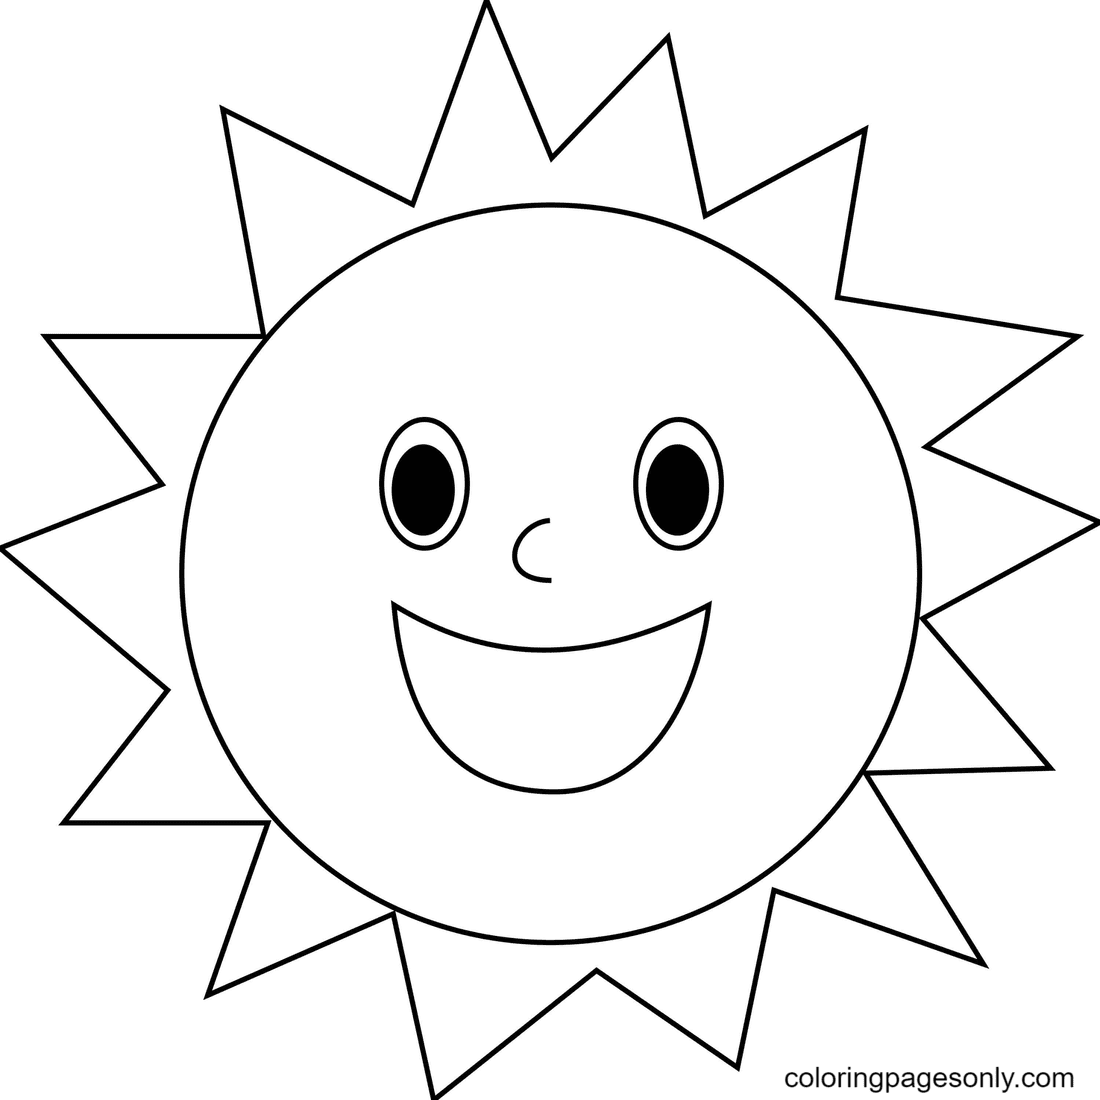 The Sun is Smiling Coloring Page